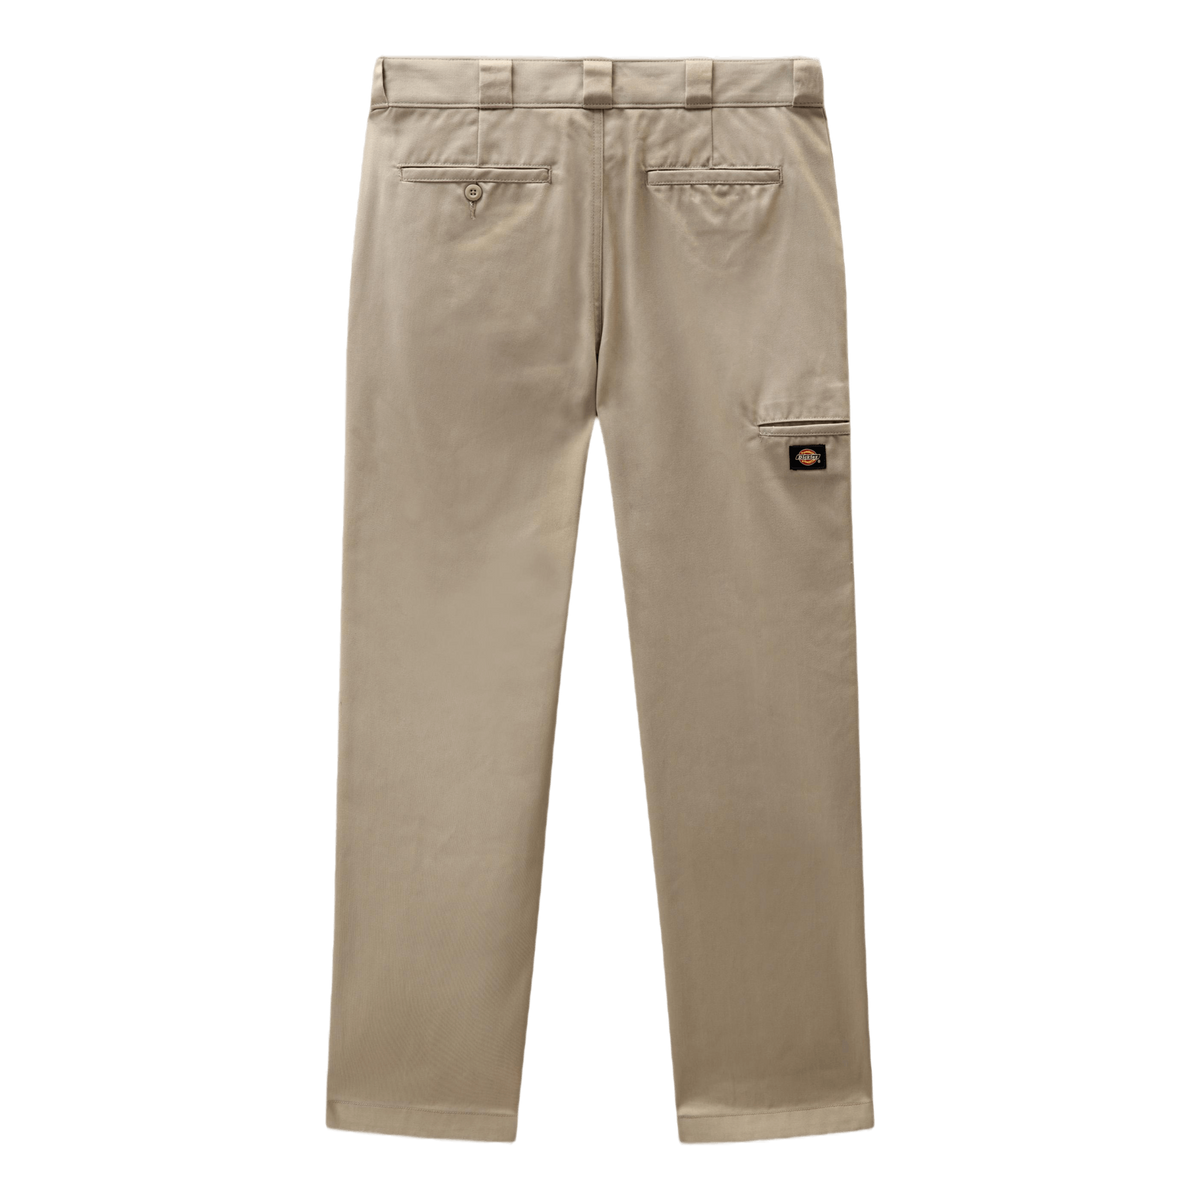 Pants and jeans Dickies Double Knee Rec Twill Work Pants Khaki